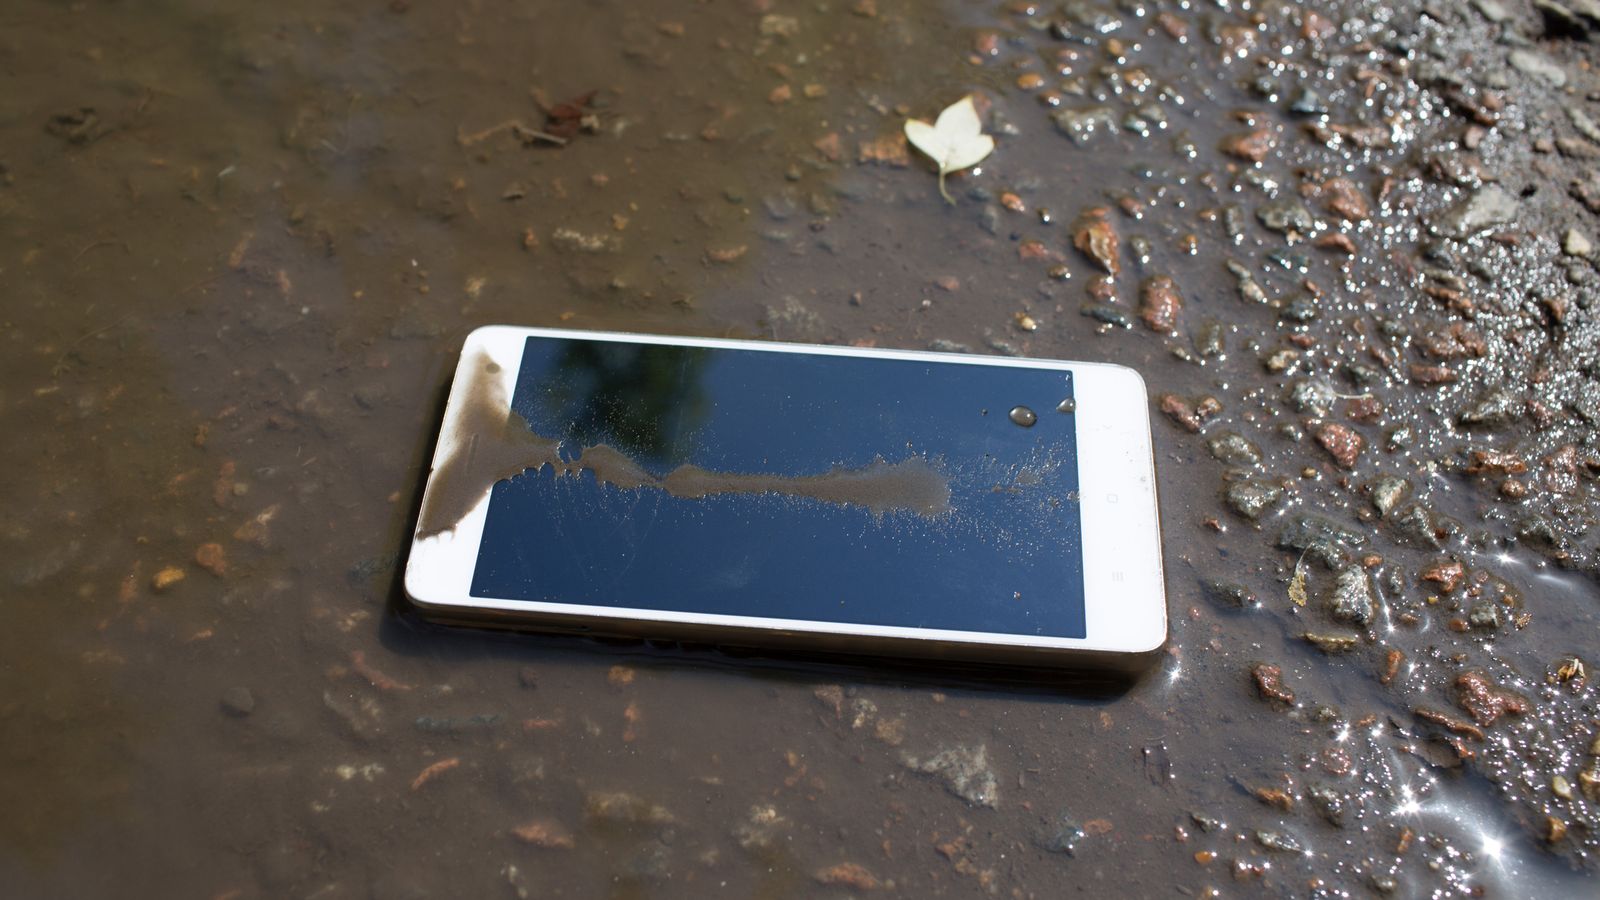 Mobile phone lying on pavement in puddle. Pic: iStock